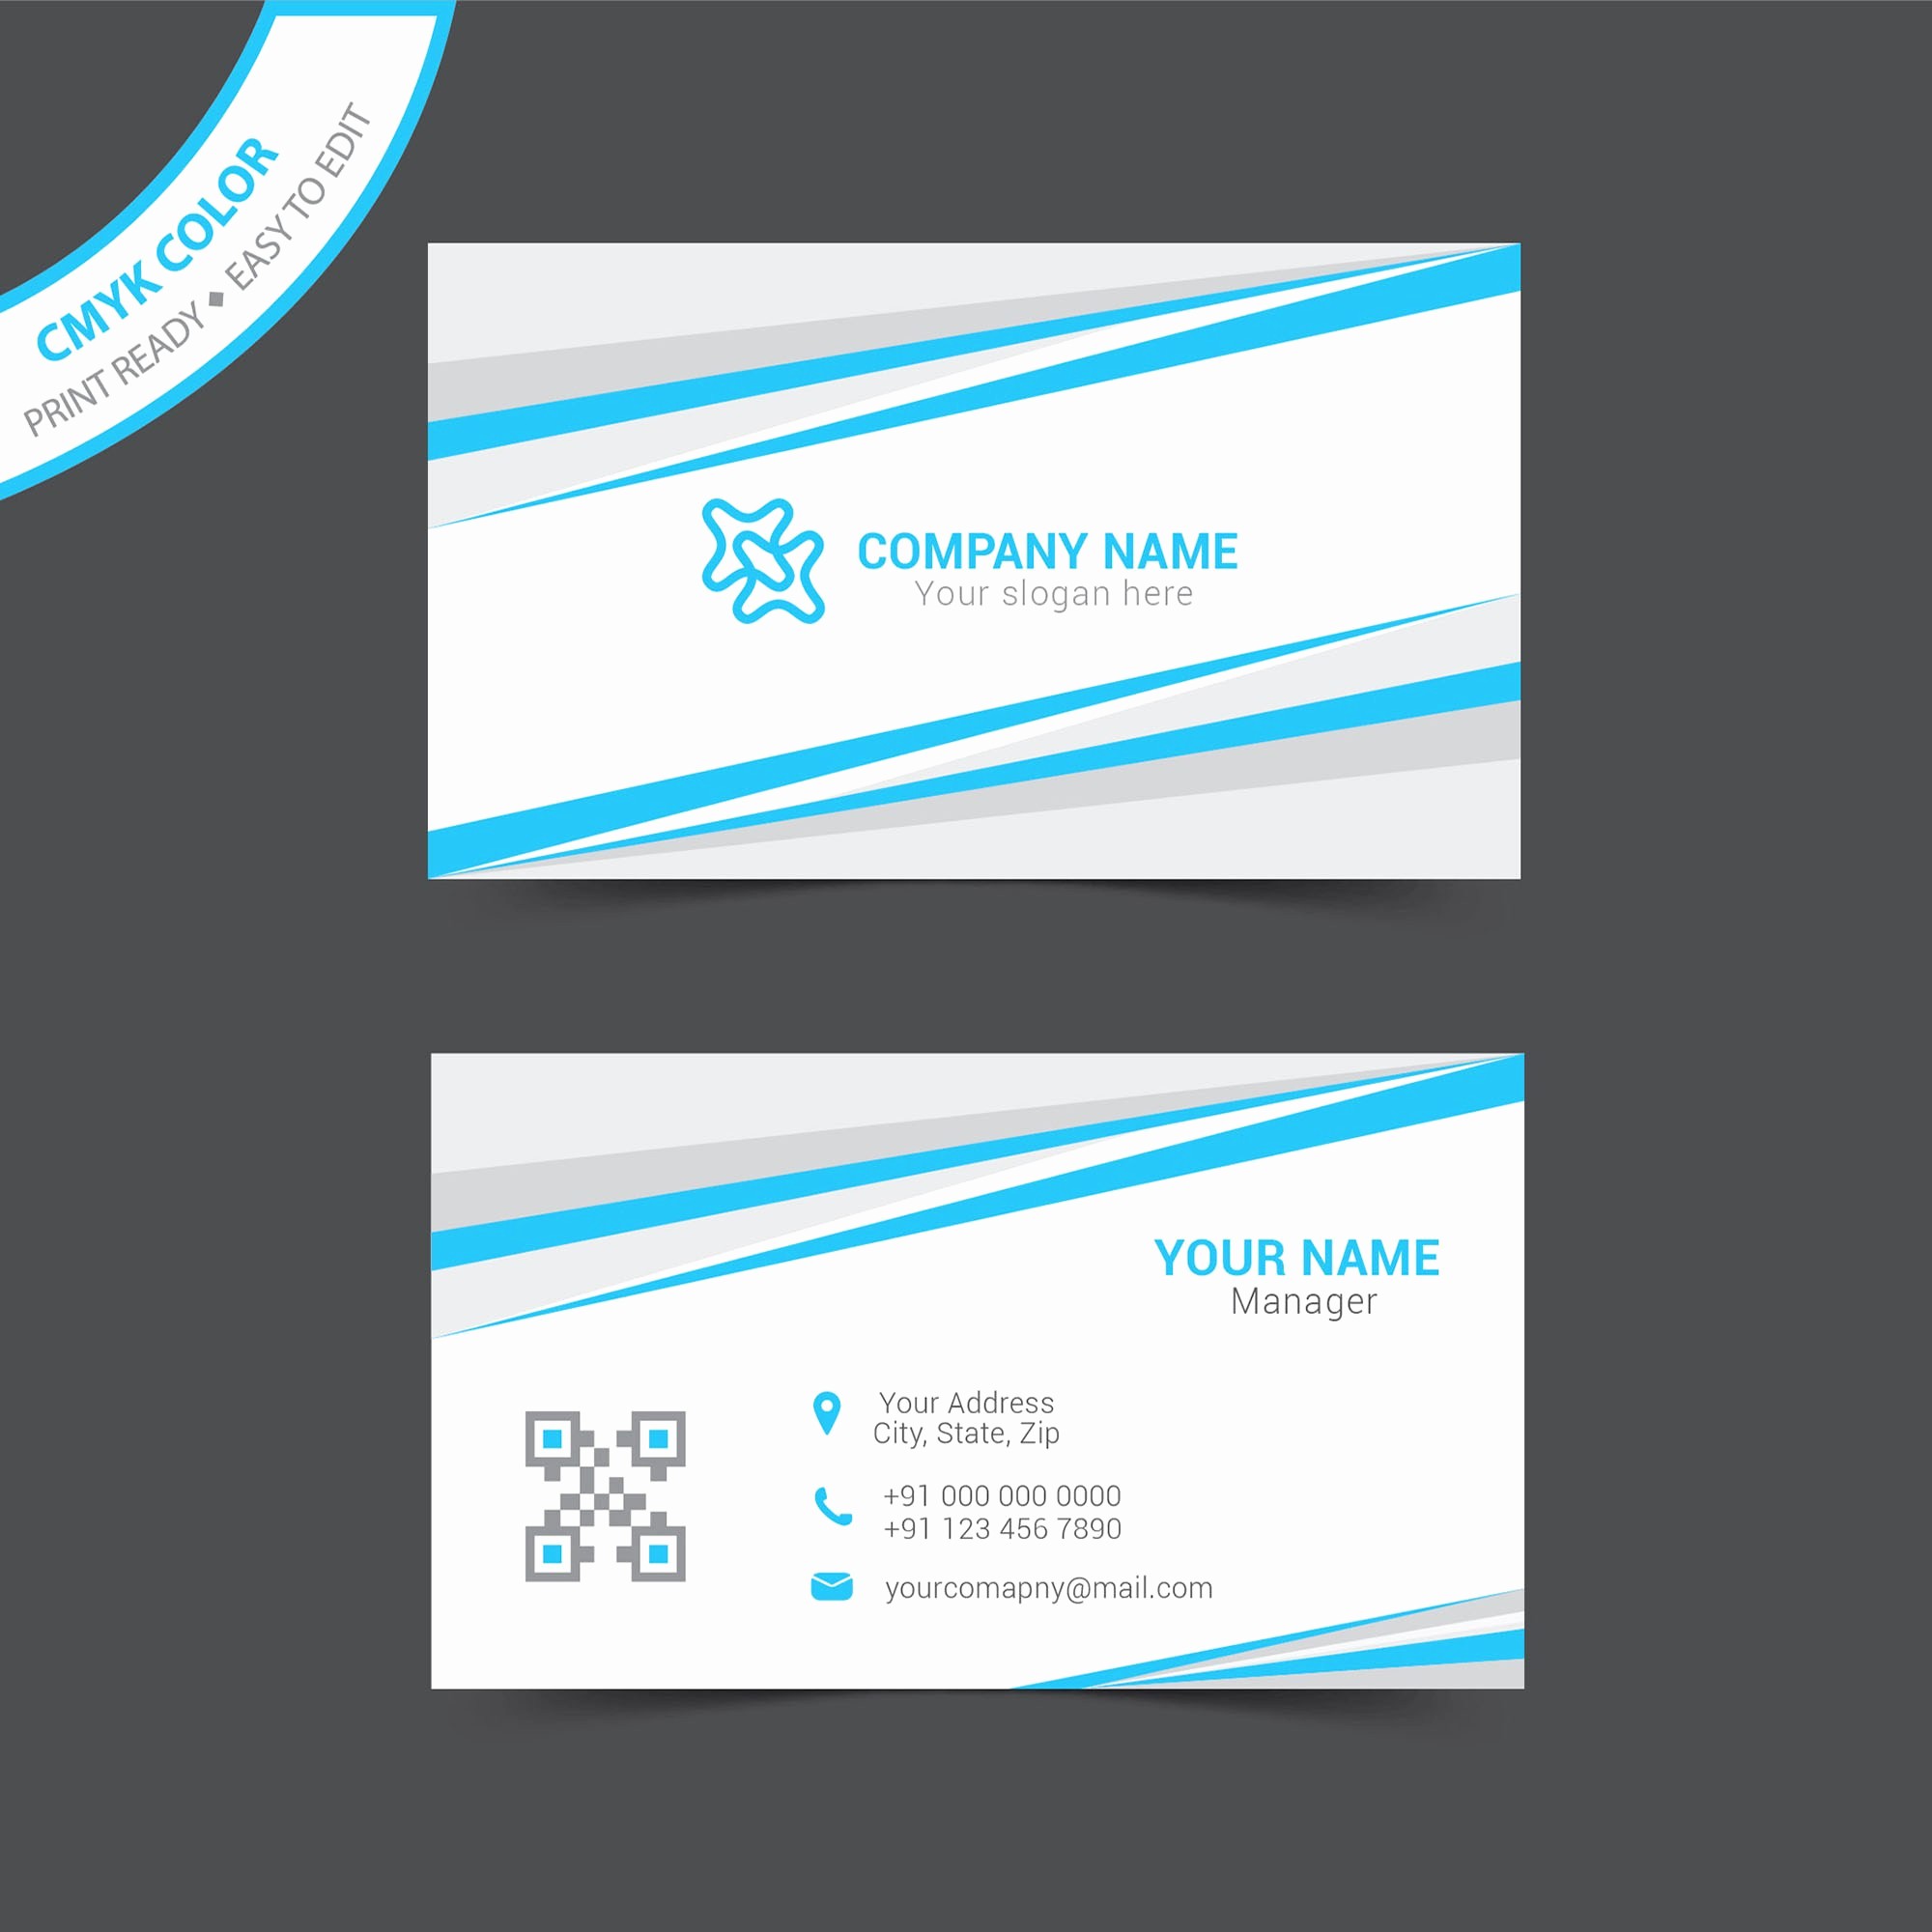 Microsoft Business Card Template Free Lovely Microsoft Business Card Template Free – Free Business Card